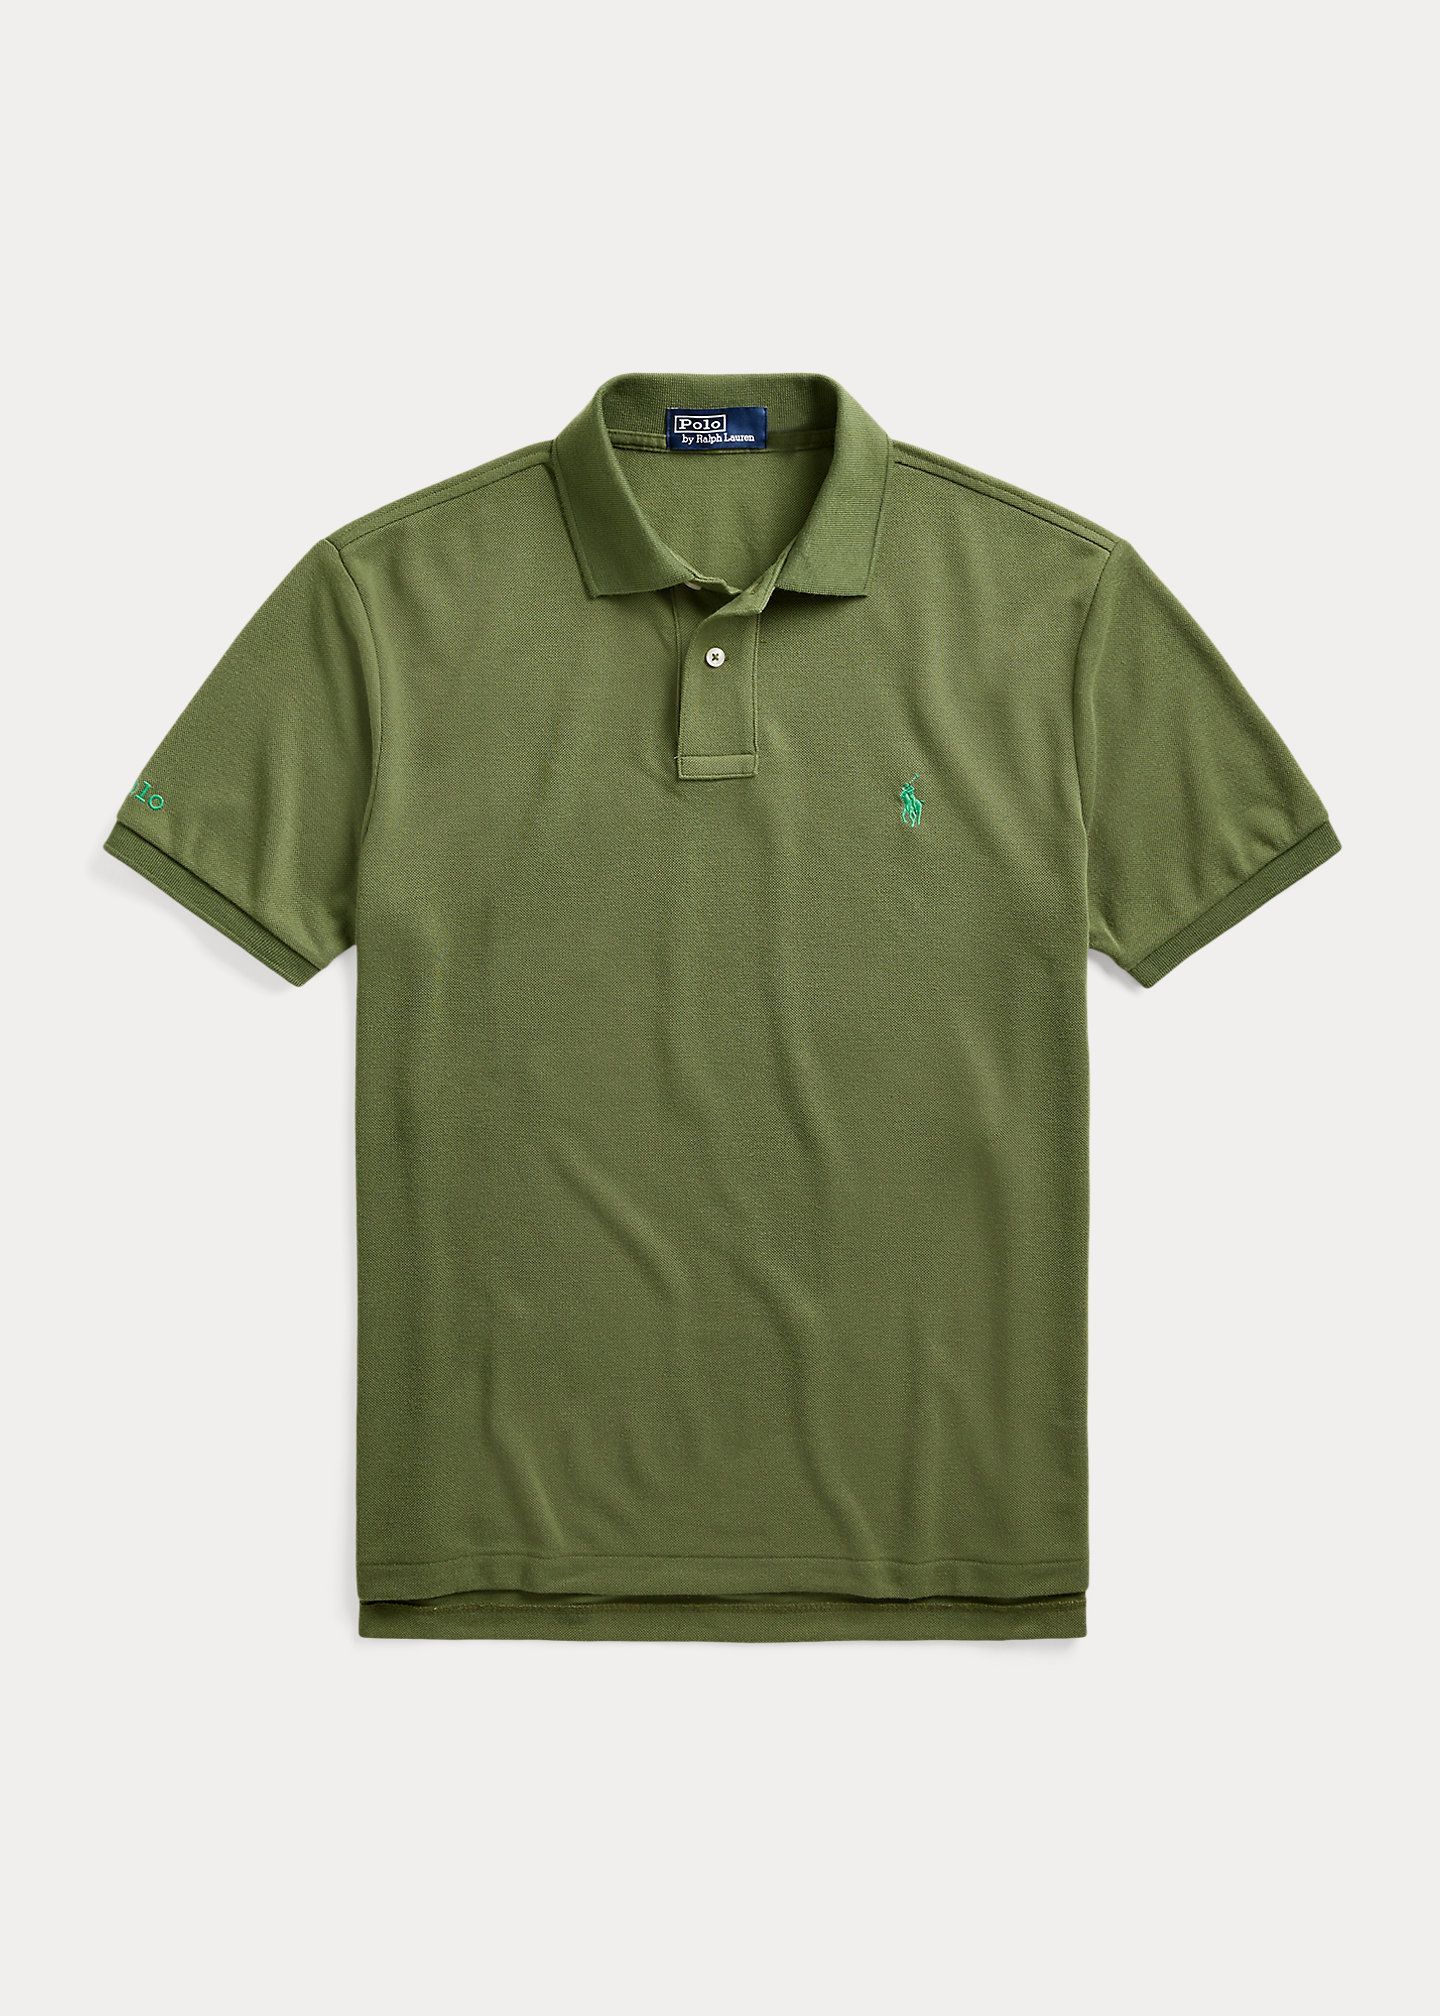 t shirt under polo